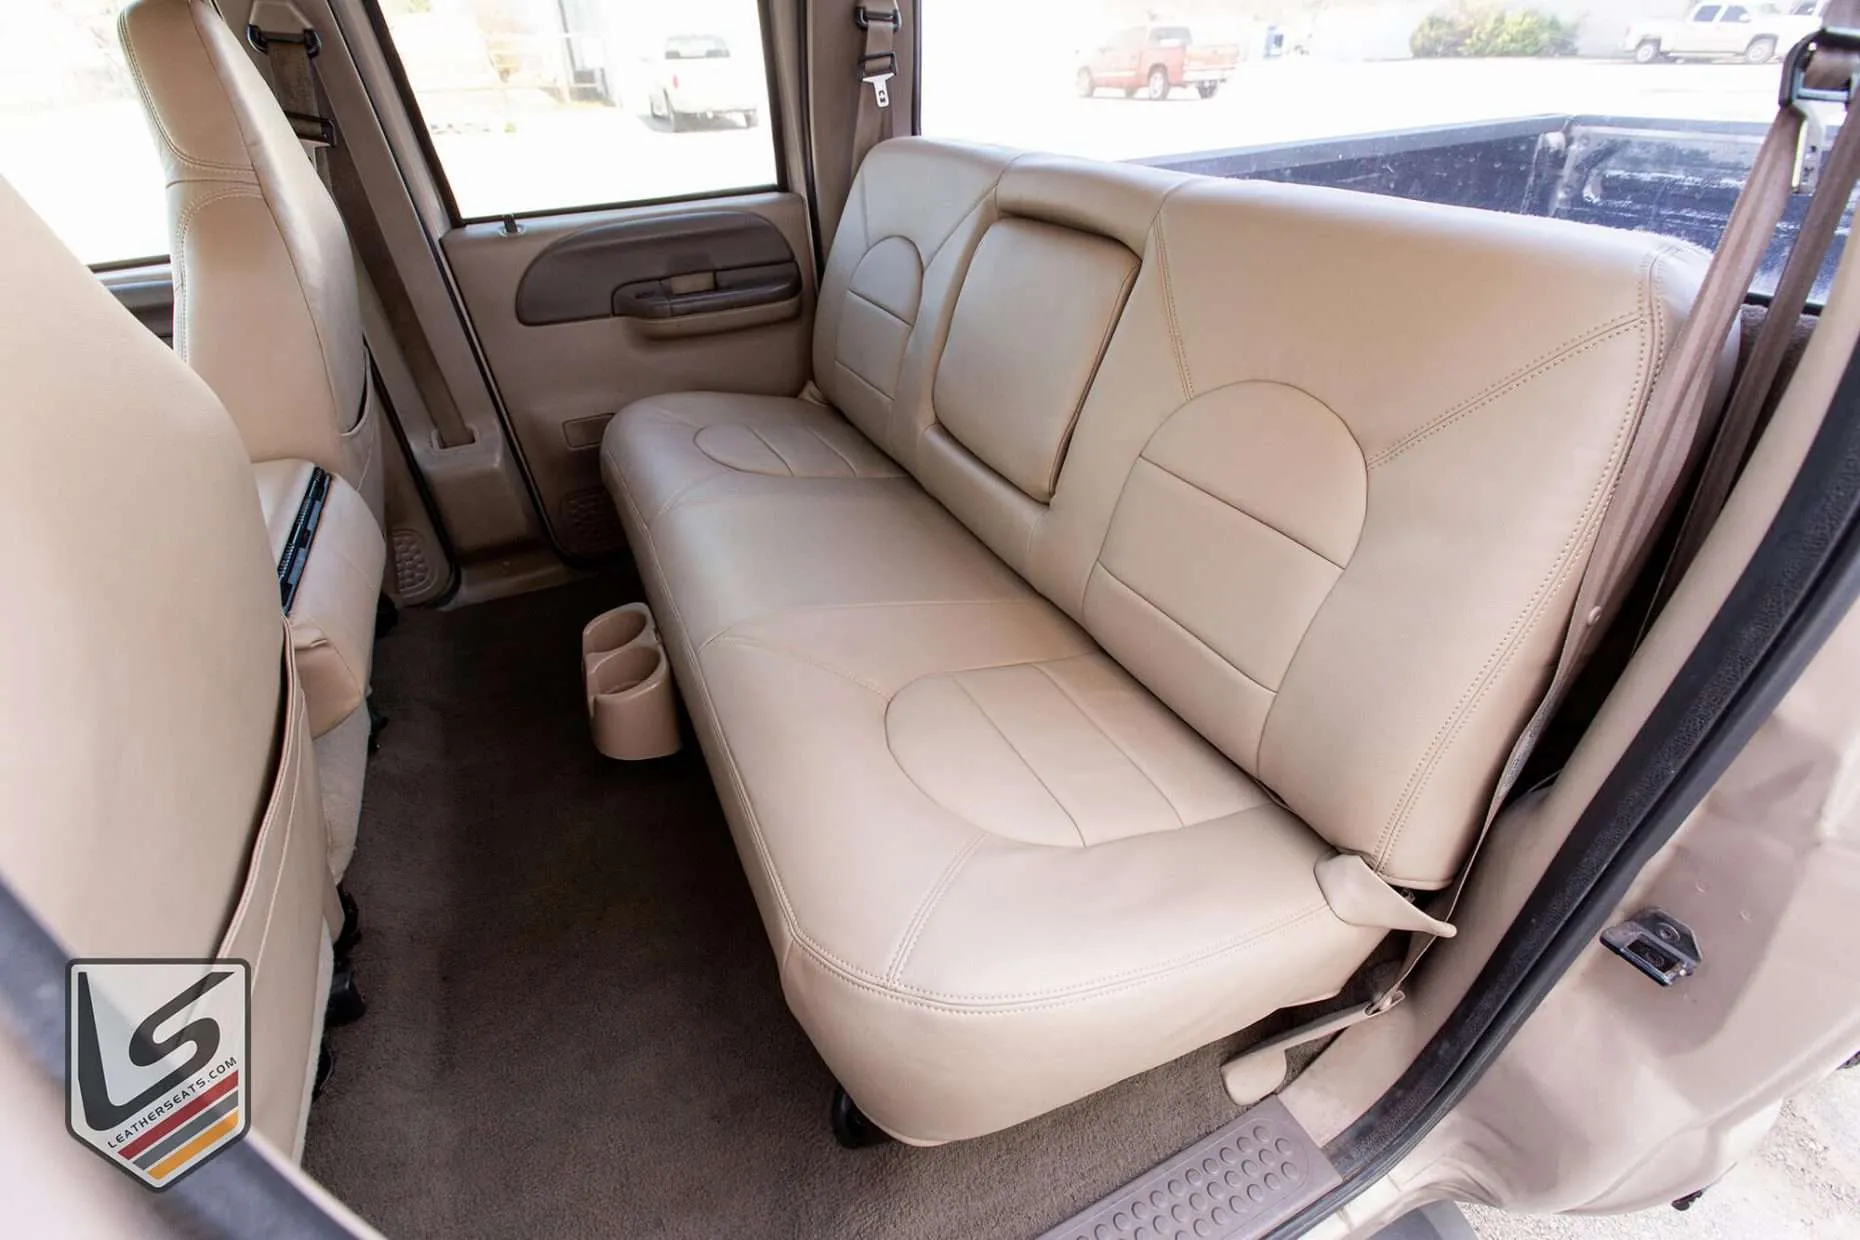 LeatherSeats.com Ford F-250 leather interior in Nutmeg - rear seats